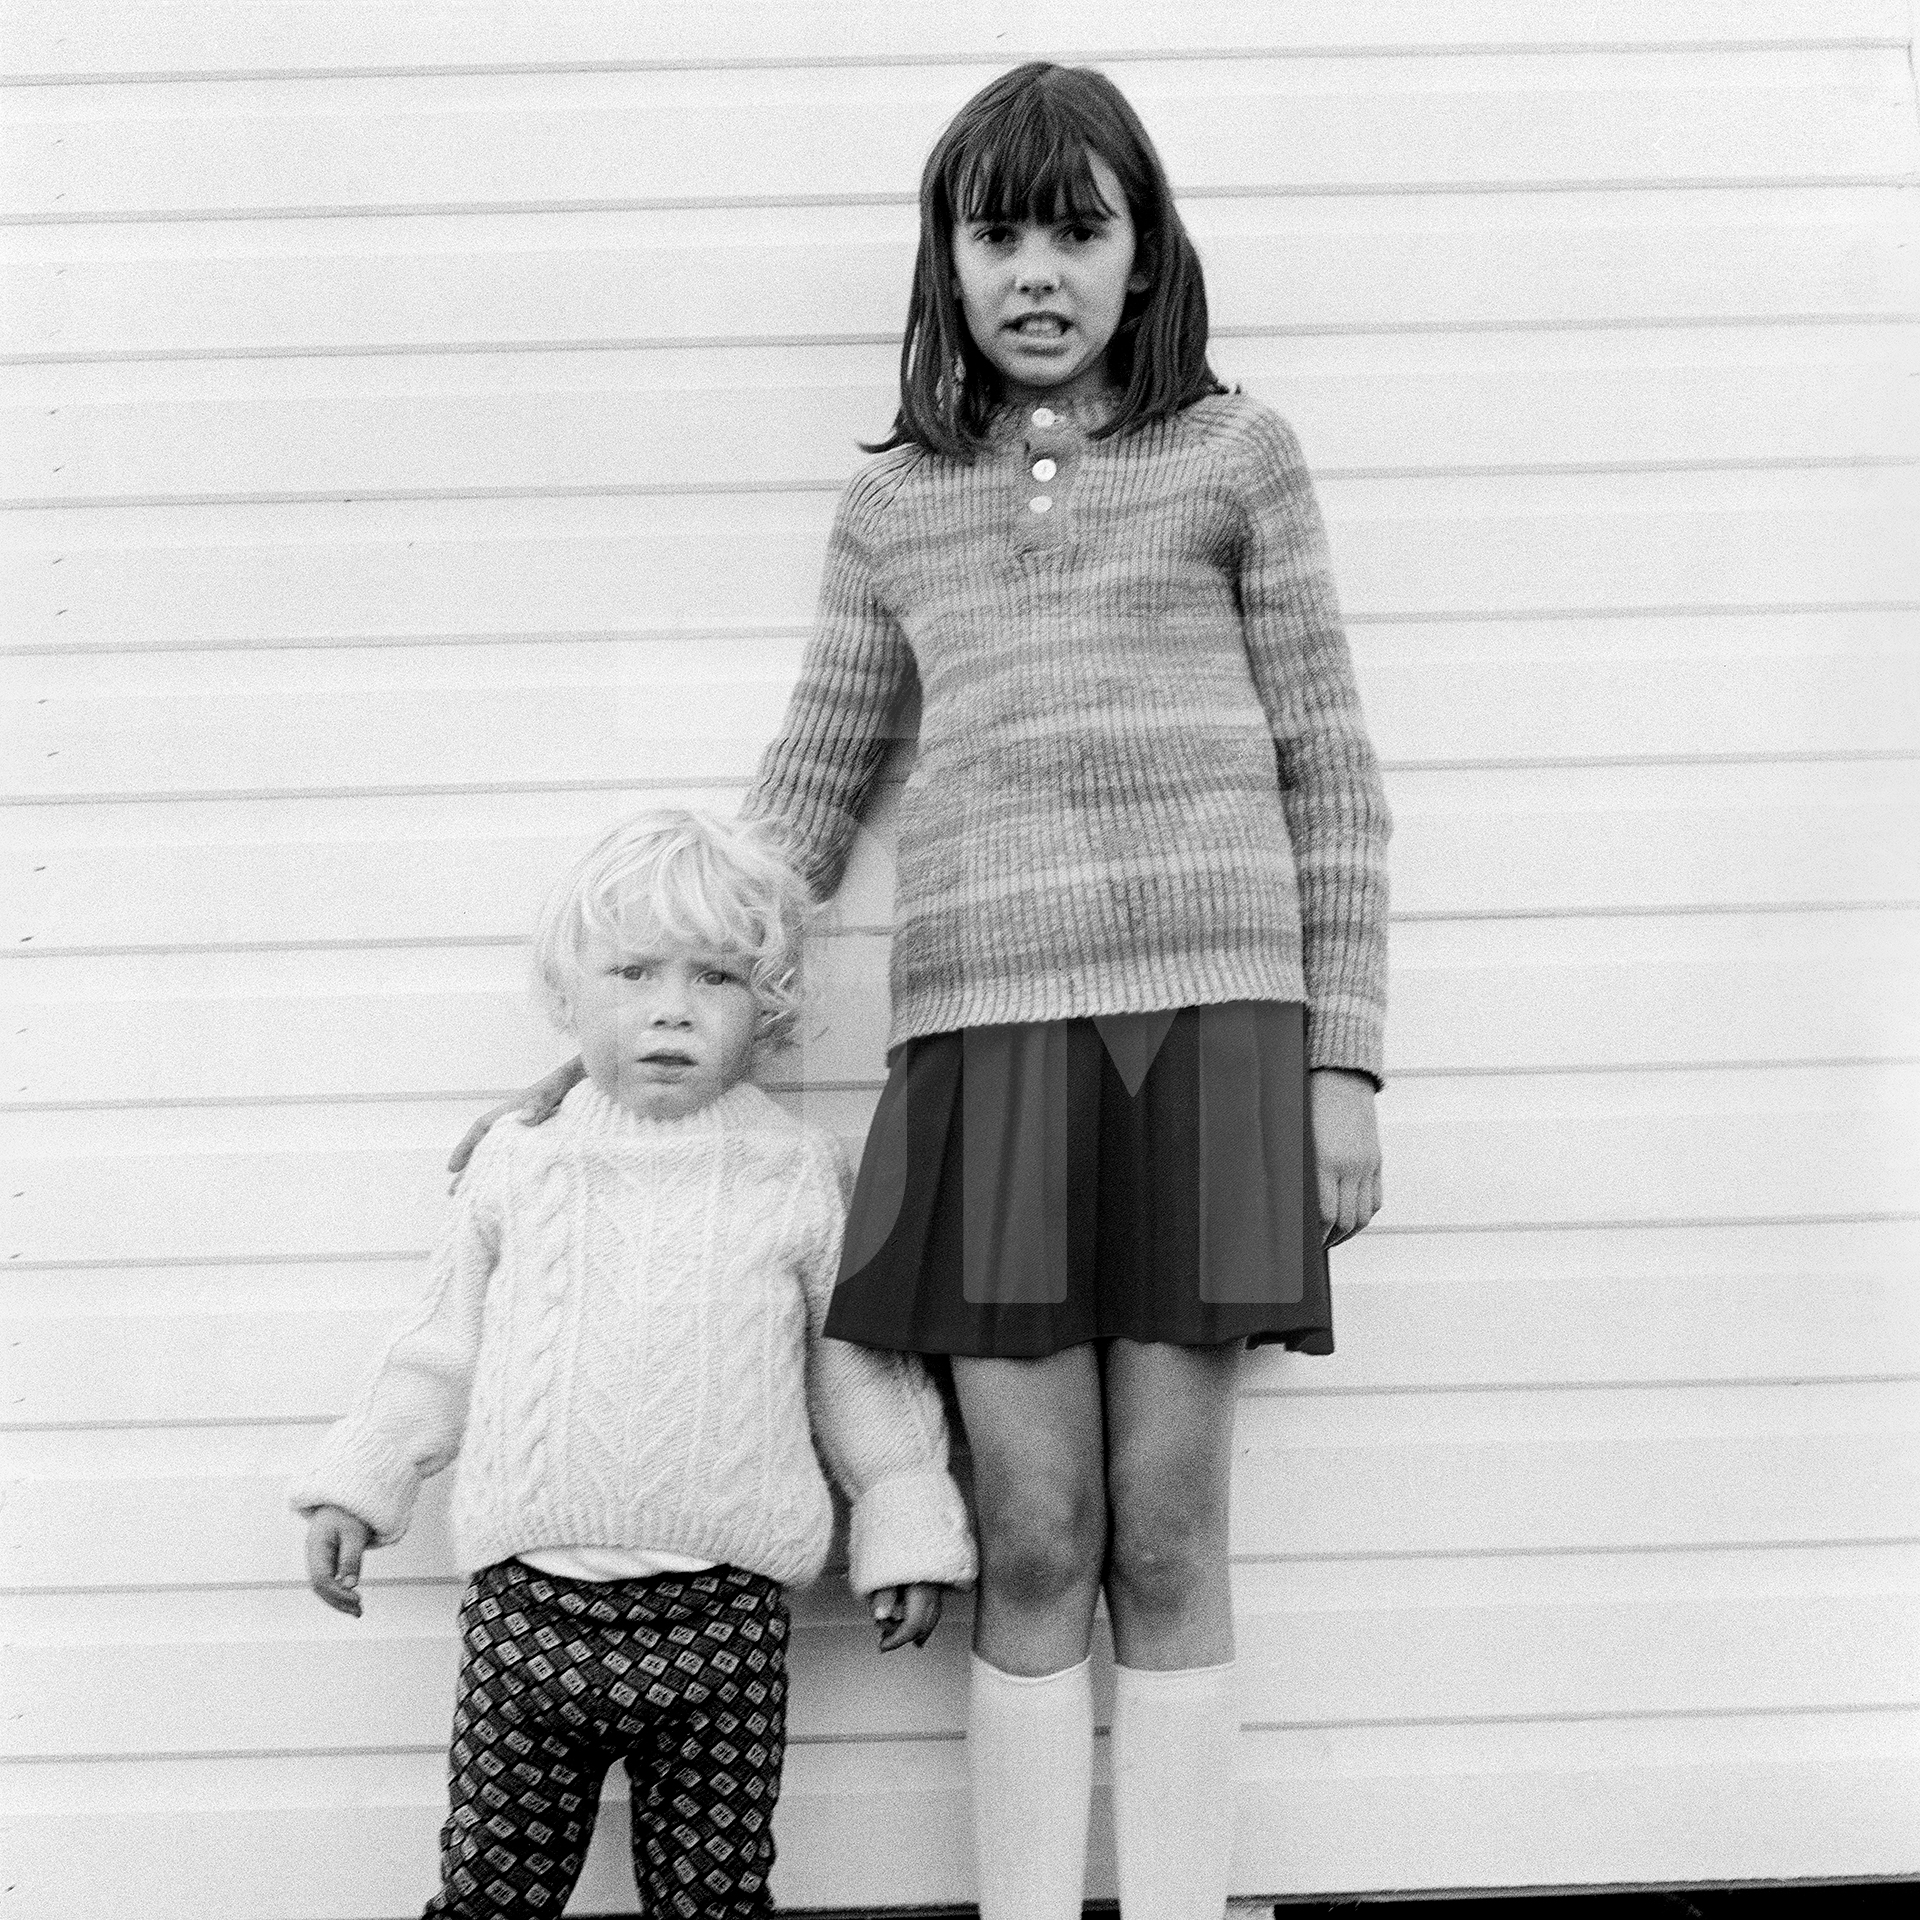 Brother and sister, Martin and Debbie Pout, Hartlepool, Cleveland. September 1974 by Daniel Meadows